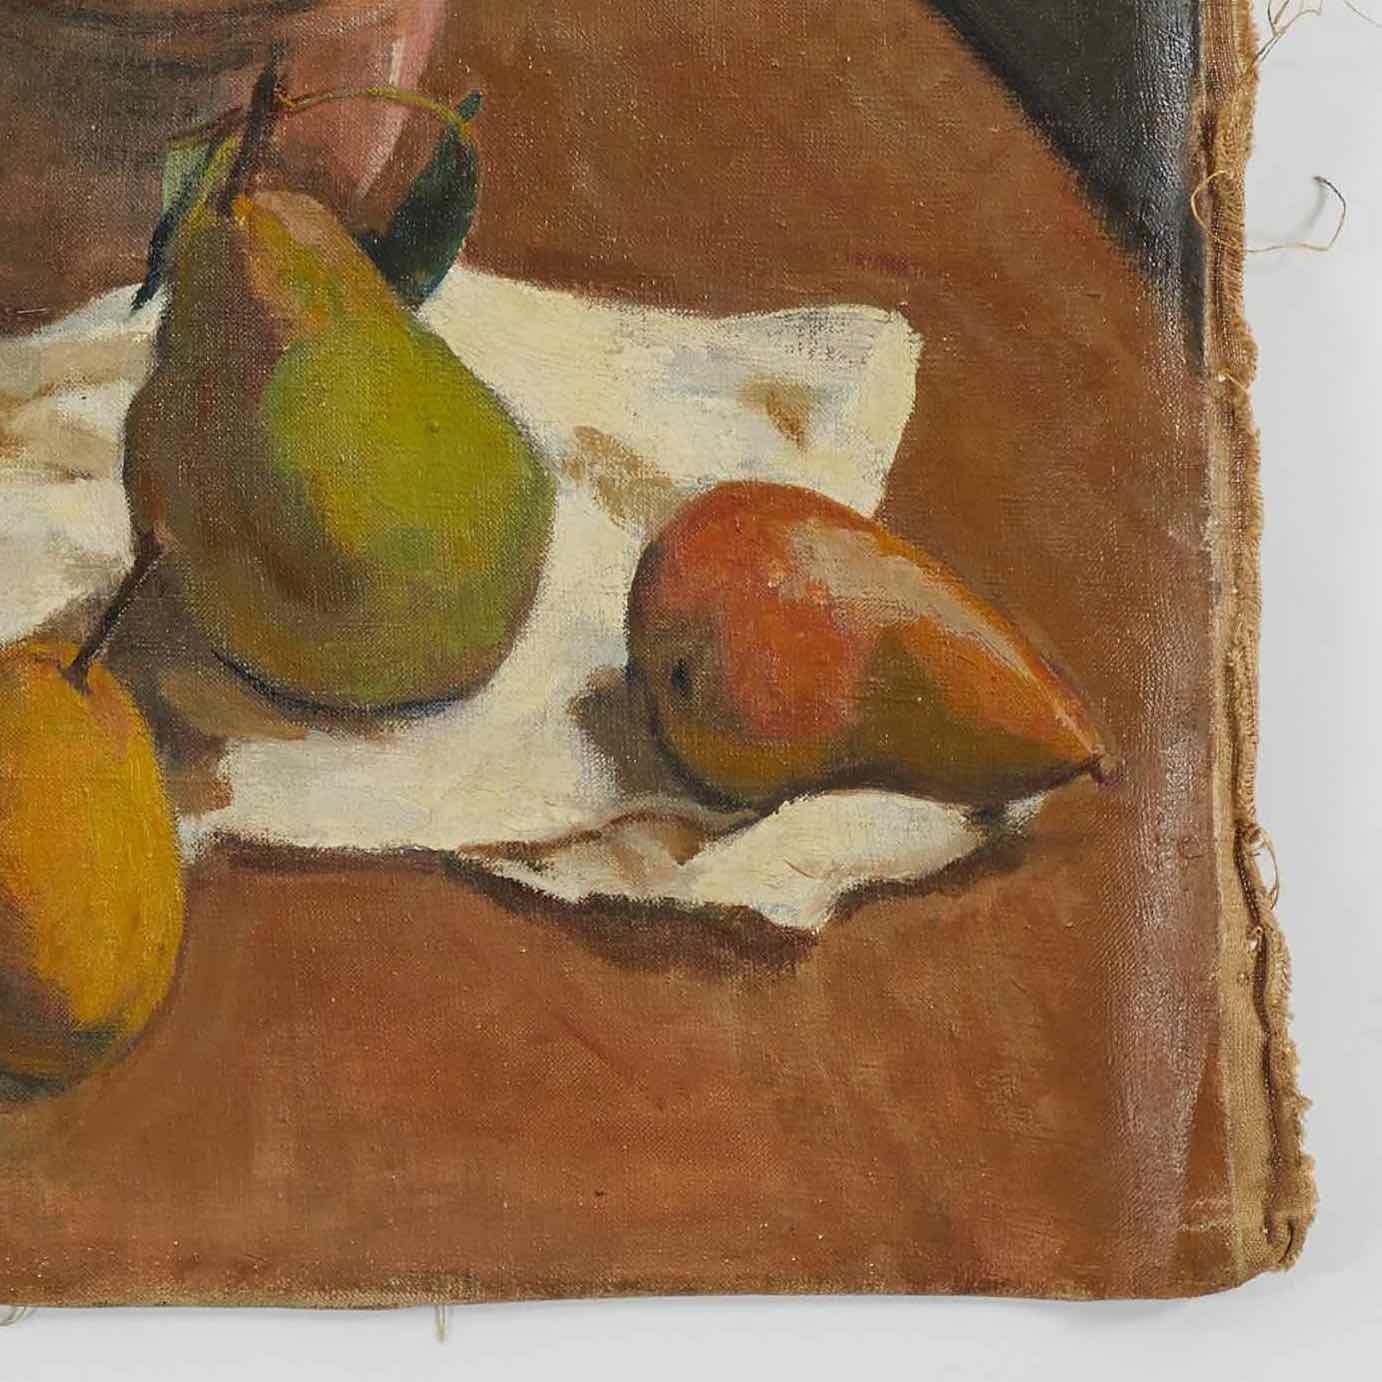 Early 20th-century French signed still life oil painting by artist Boris Buchet. The image depicts a bowl of fruit in a manner similar to early Cezanne. Vibrant yet contemplative, the fruits seem poised to spill out of the frame.

Boris Buchet